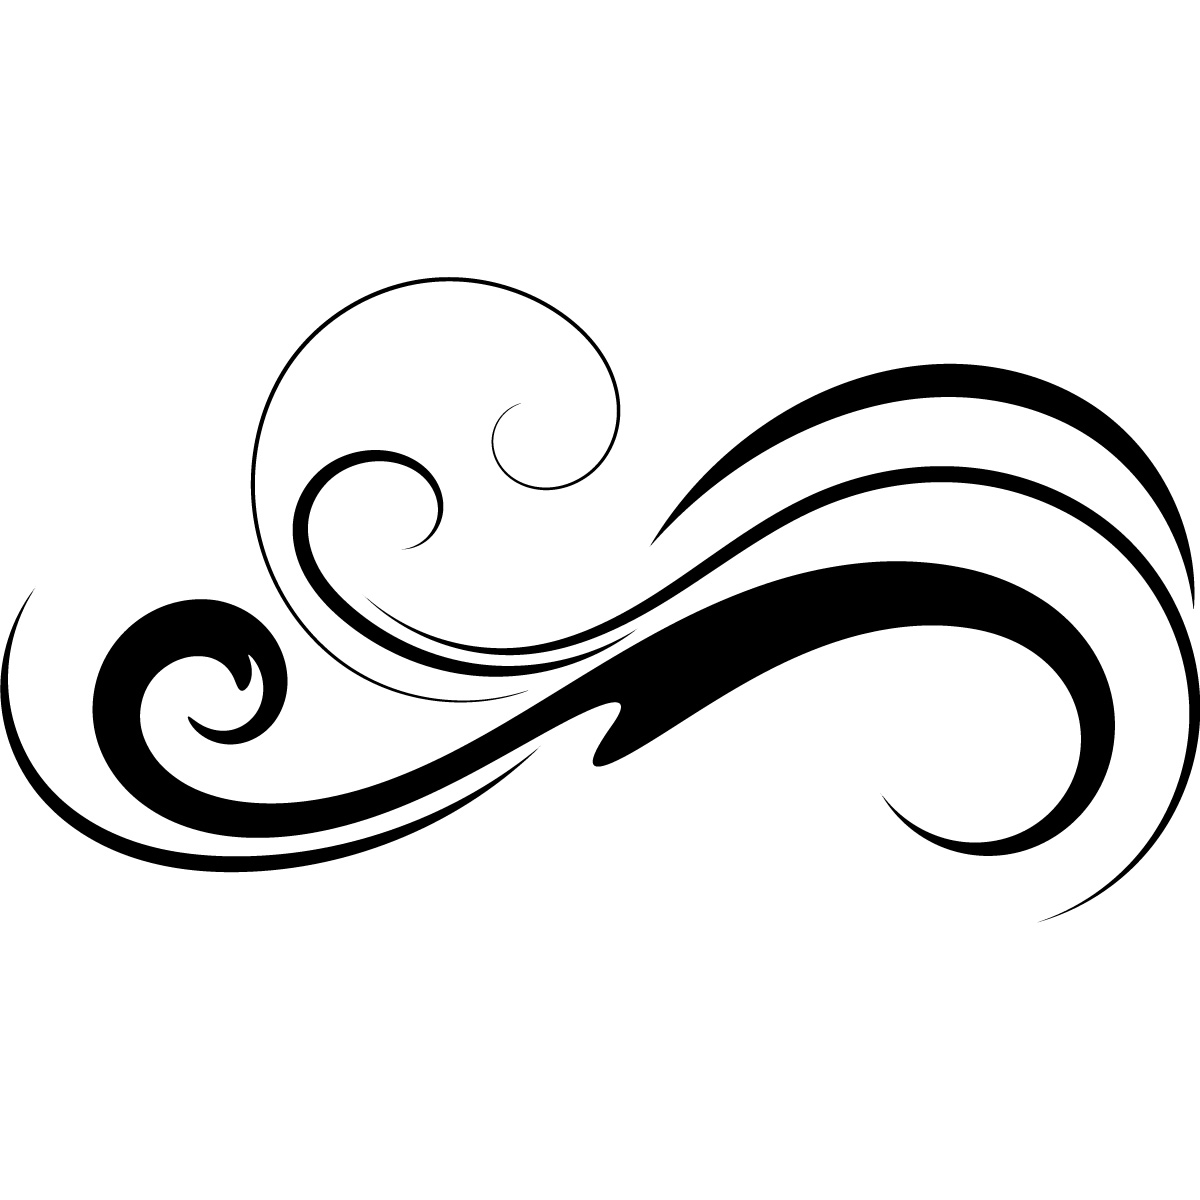 Waves black and white wave pattern clip art at vector clip art 